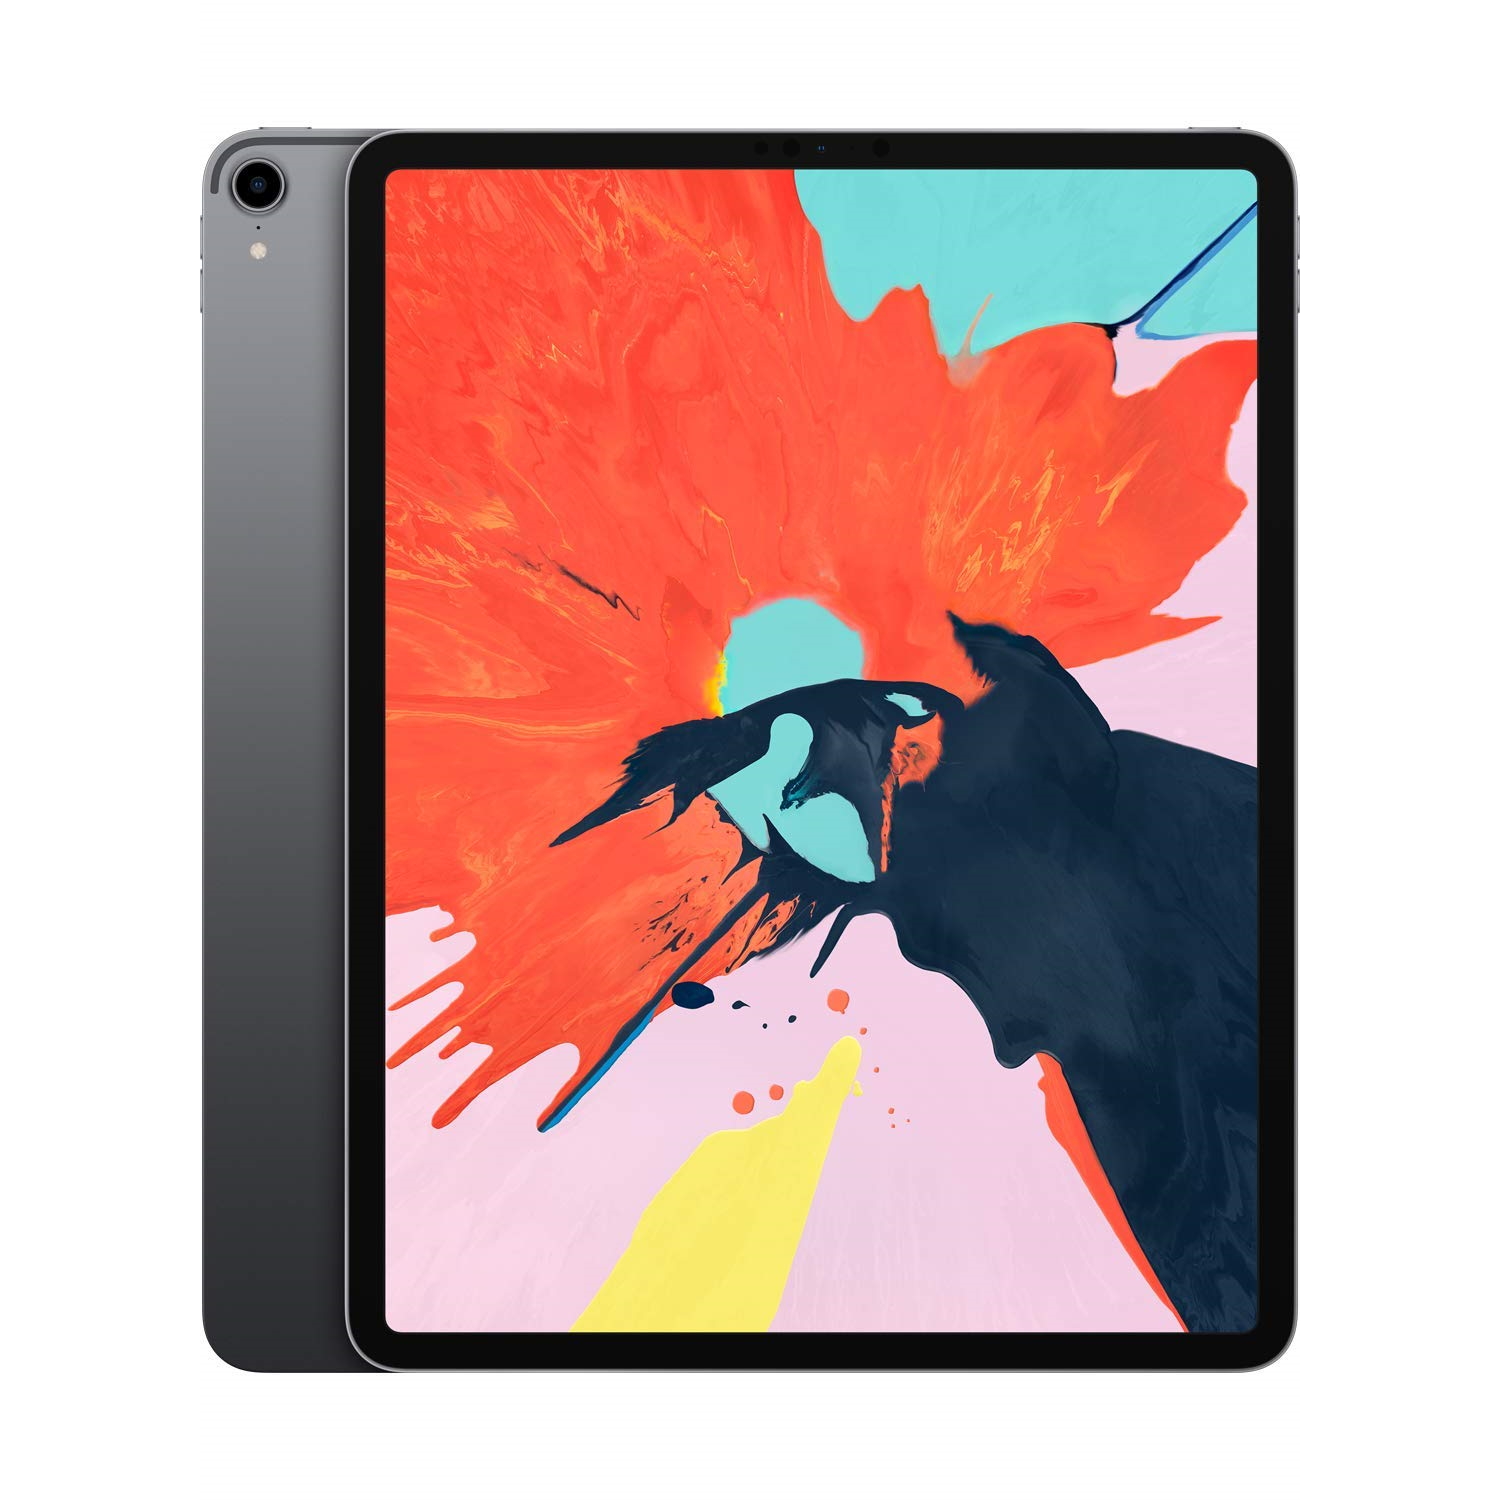 Amazing Christmas iPad deals span entire tablet range Pro, Air, and